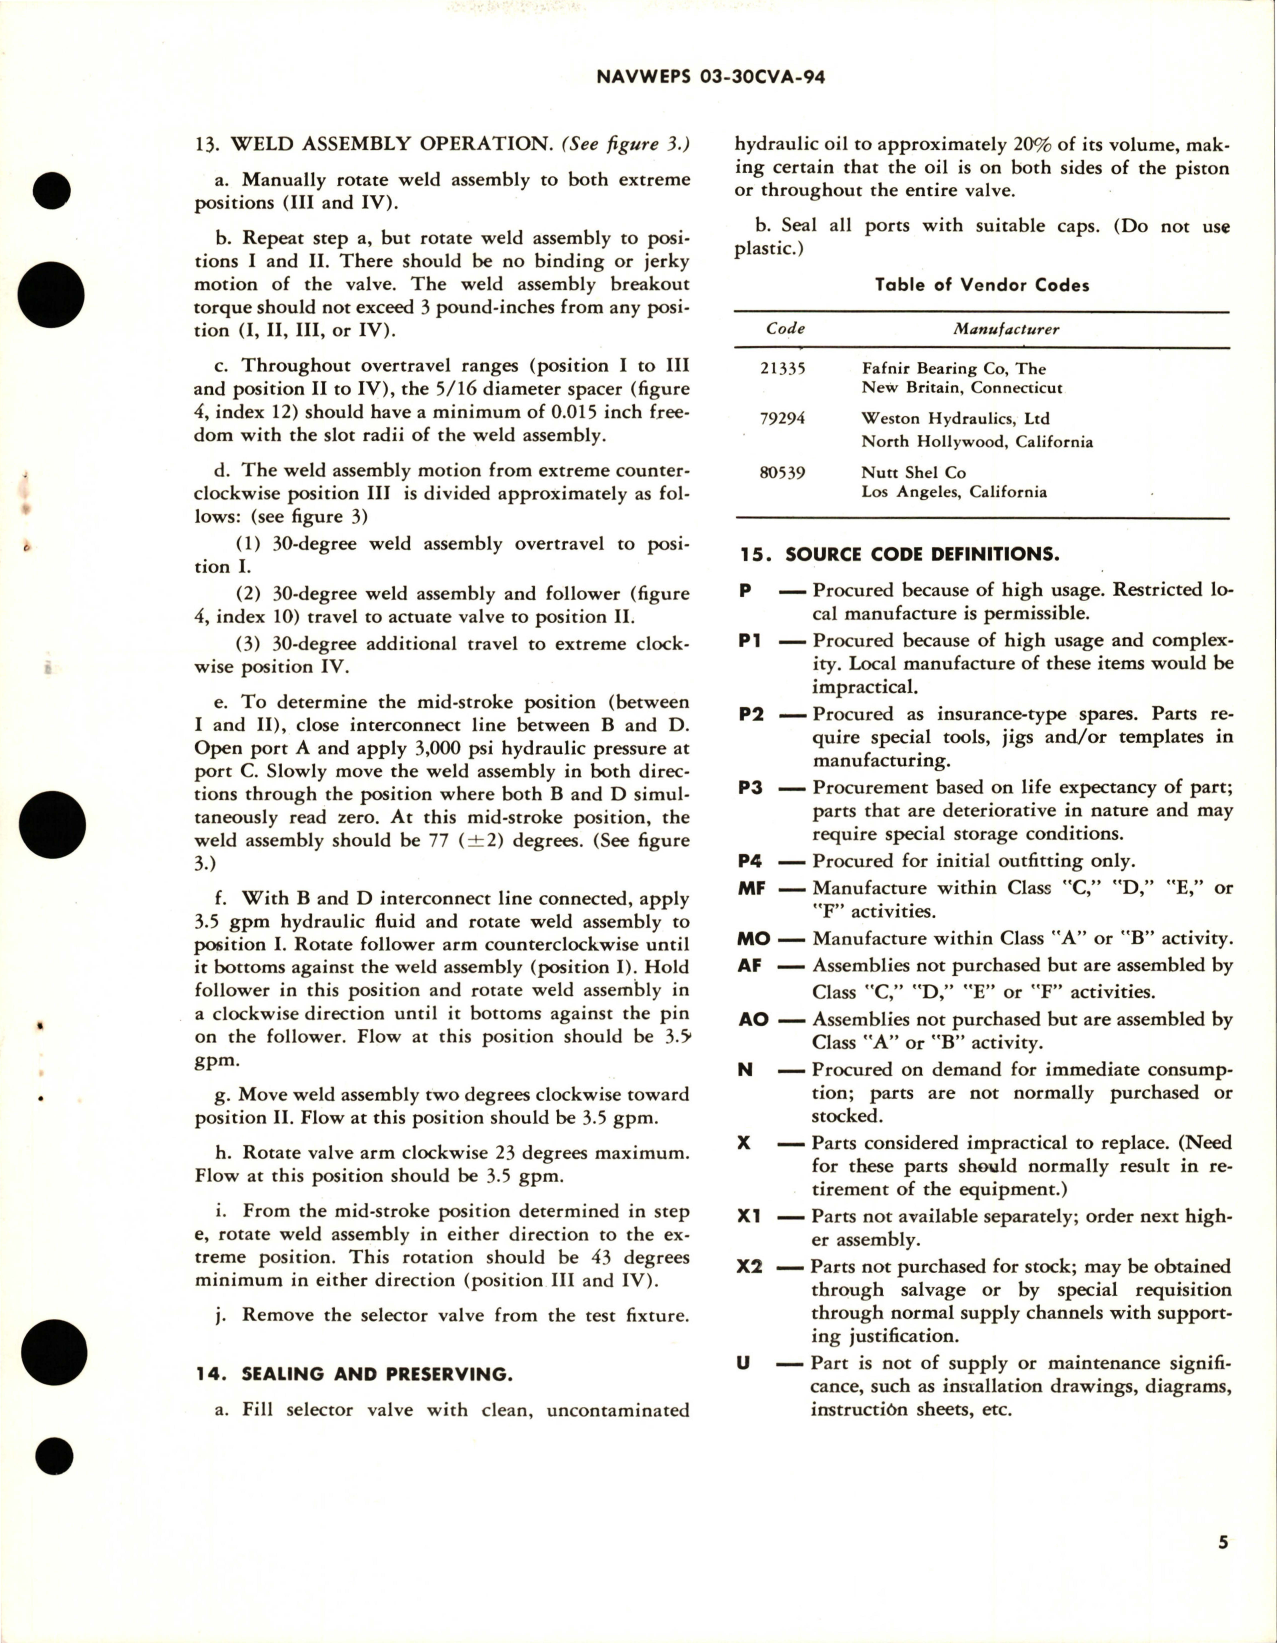 Sample page 5 from AirCorps Library document: Overhaul Instructions with Parts for Two Position Wing Control Selector Valve - CV15-401878-1, CV15-401878-3, CV15-401878-5